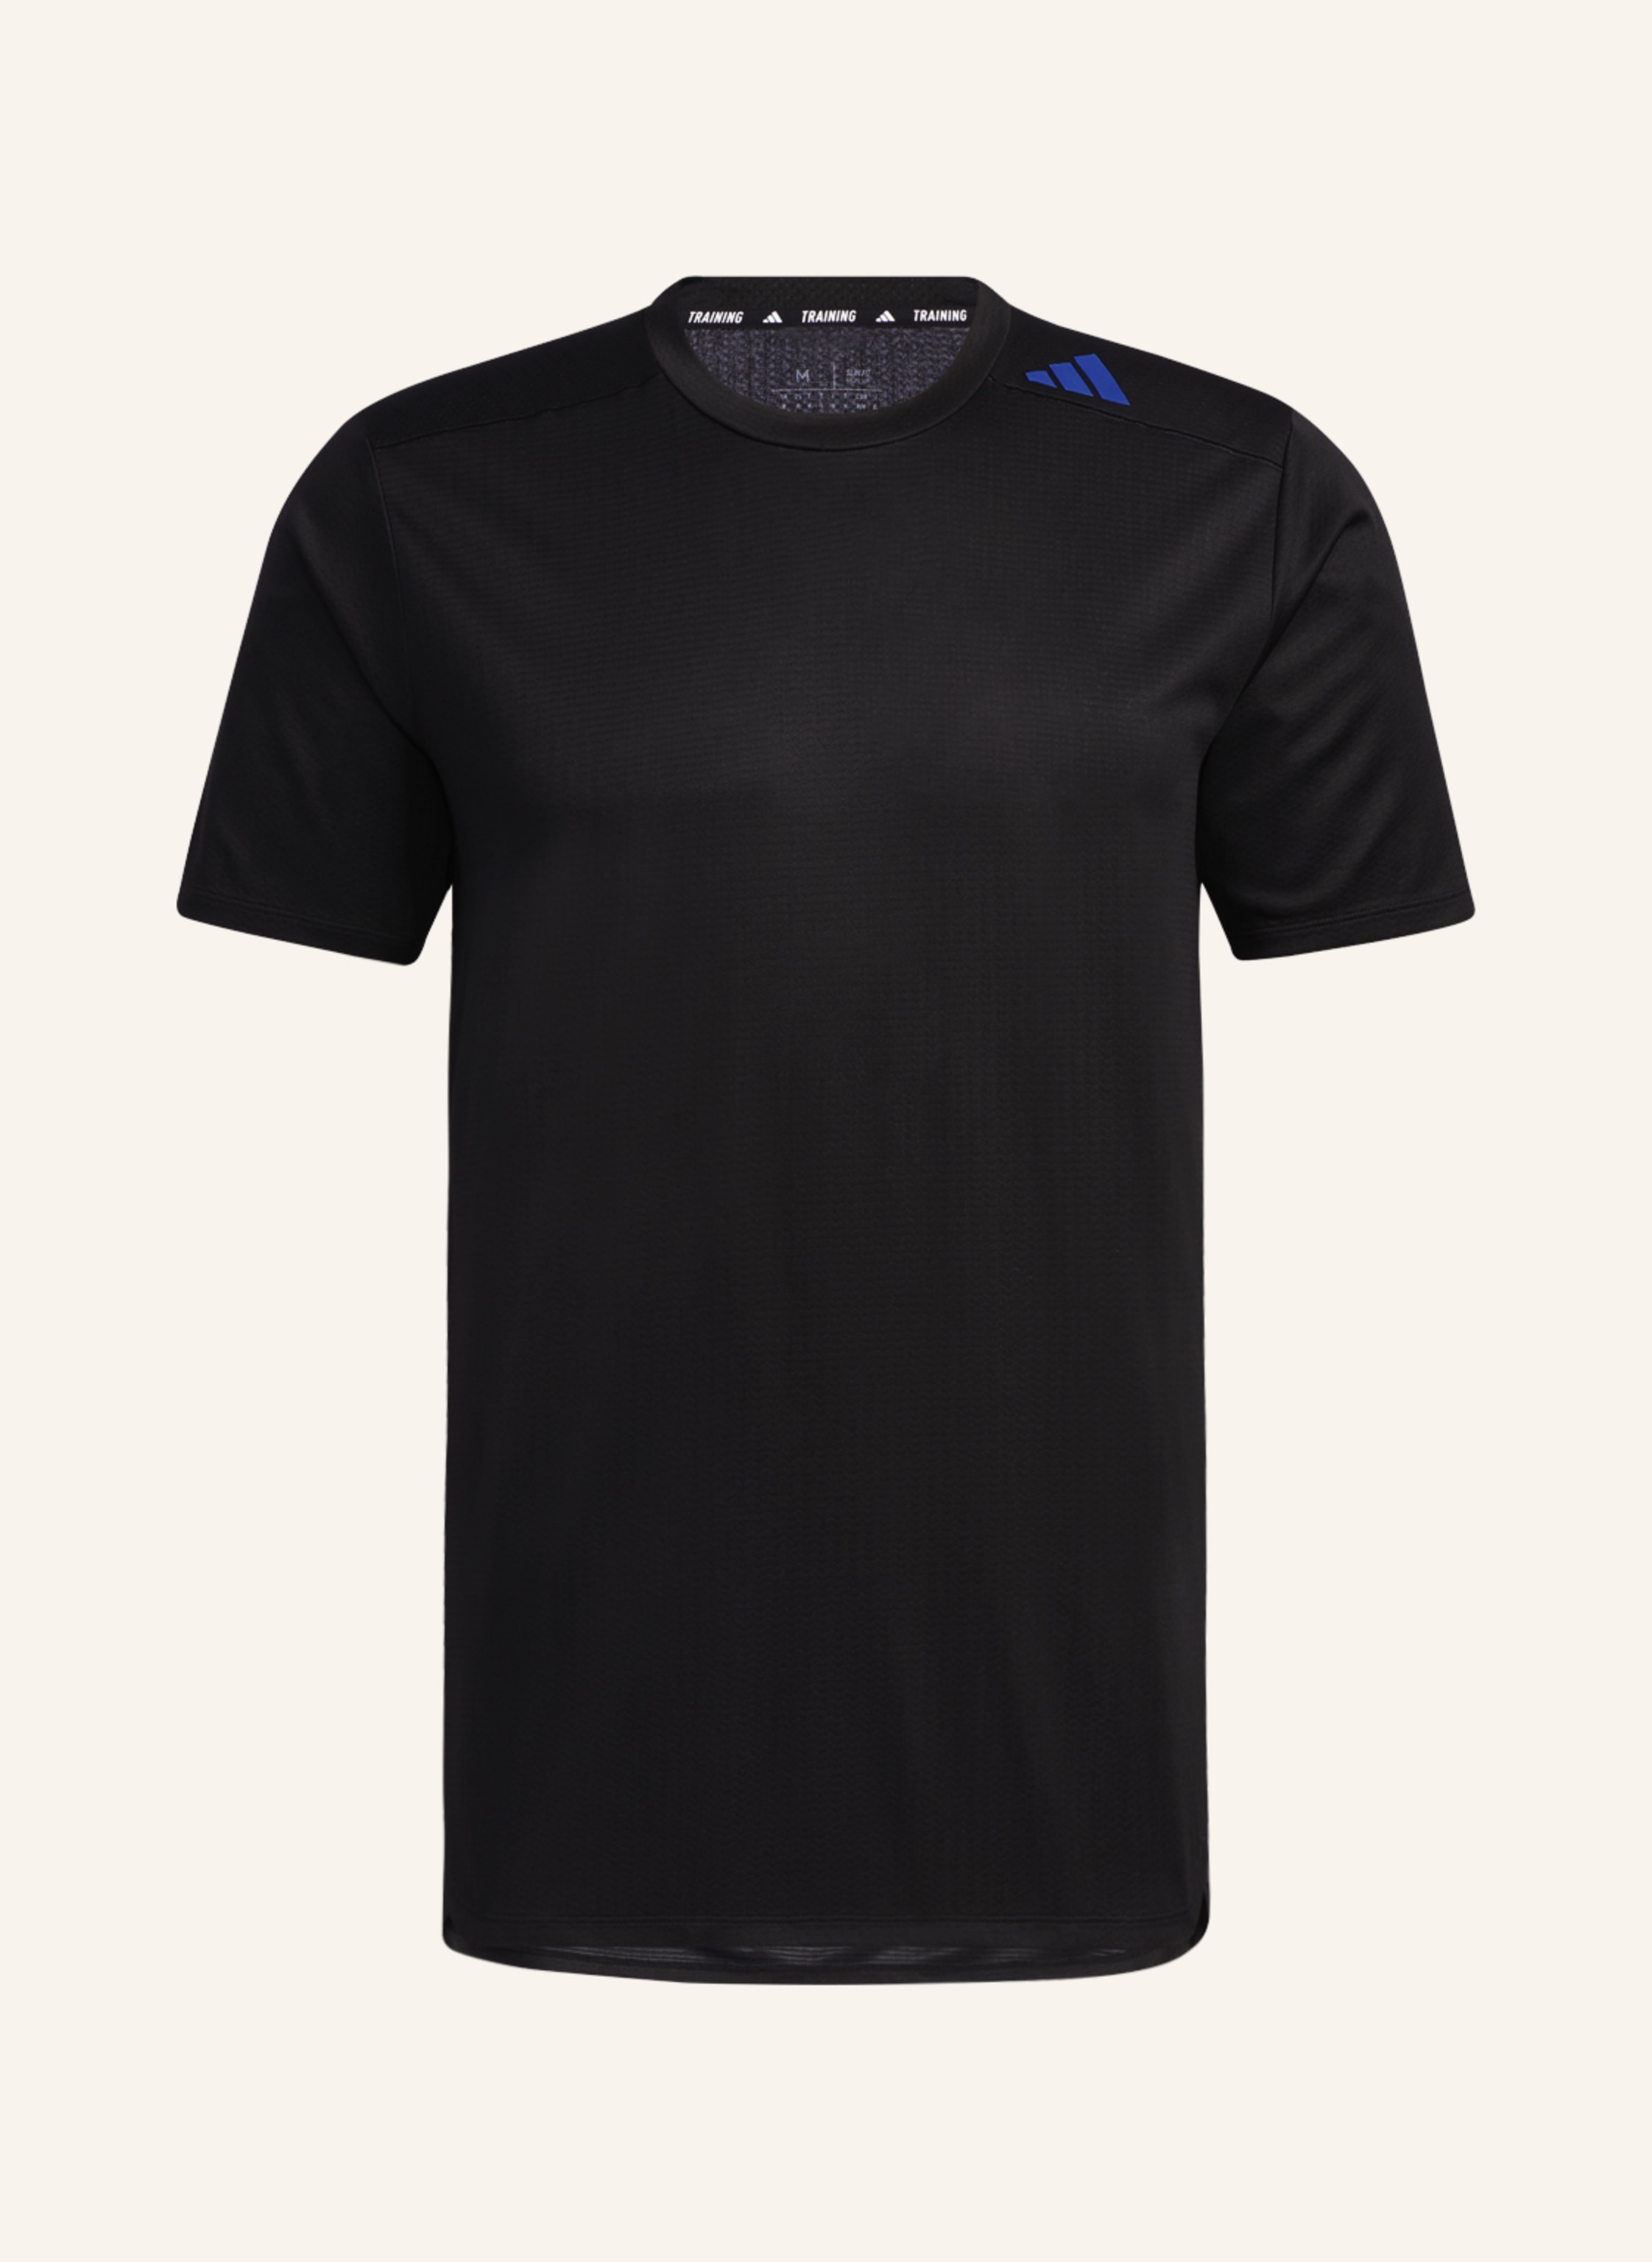 UNDER ARMOUR T-shirt SEAMLESS GRID with mesh